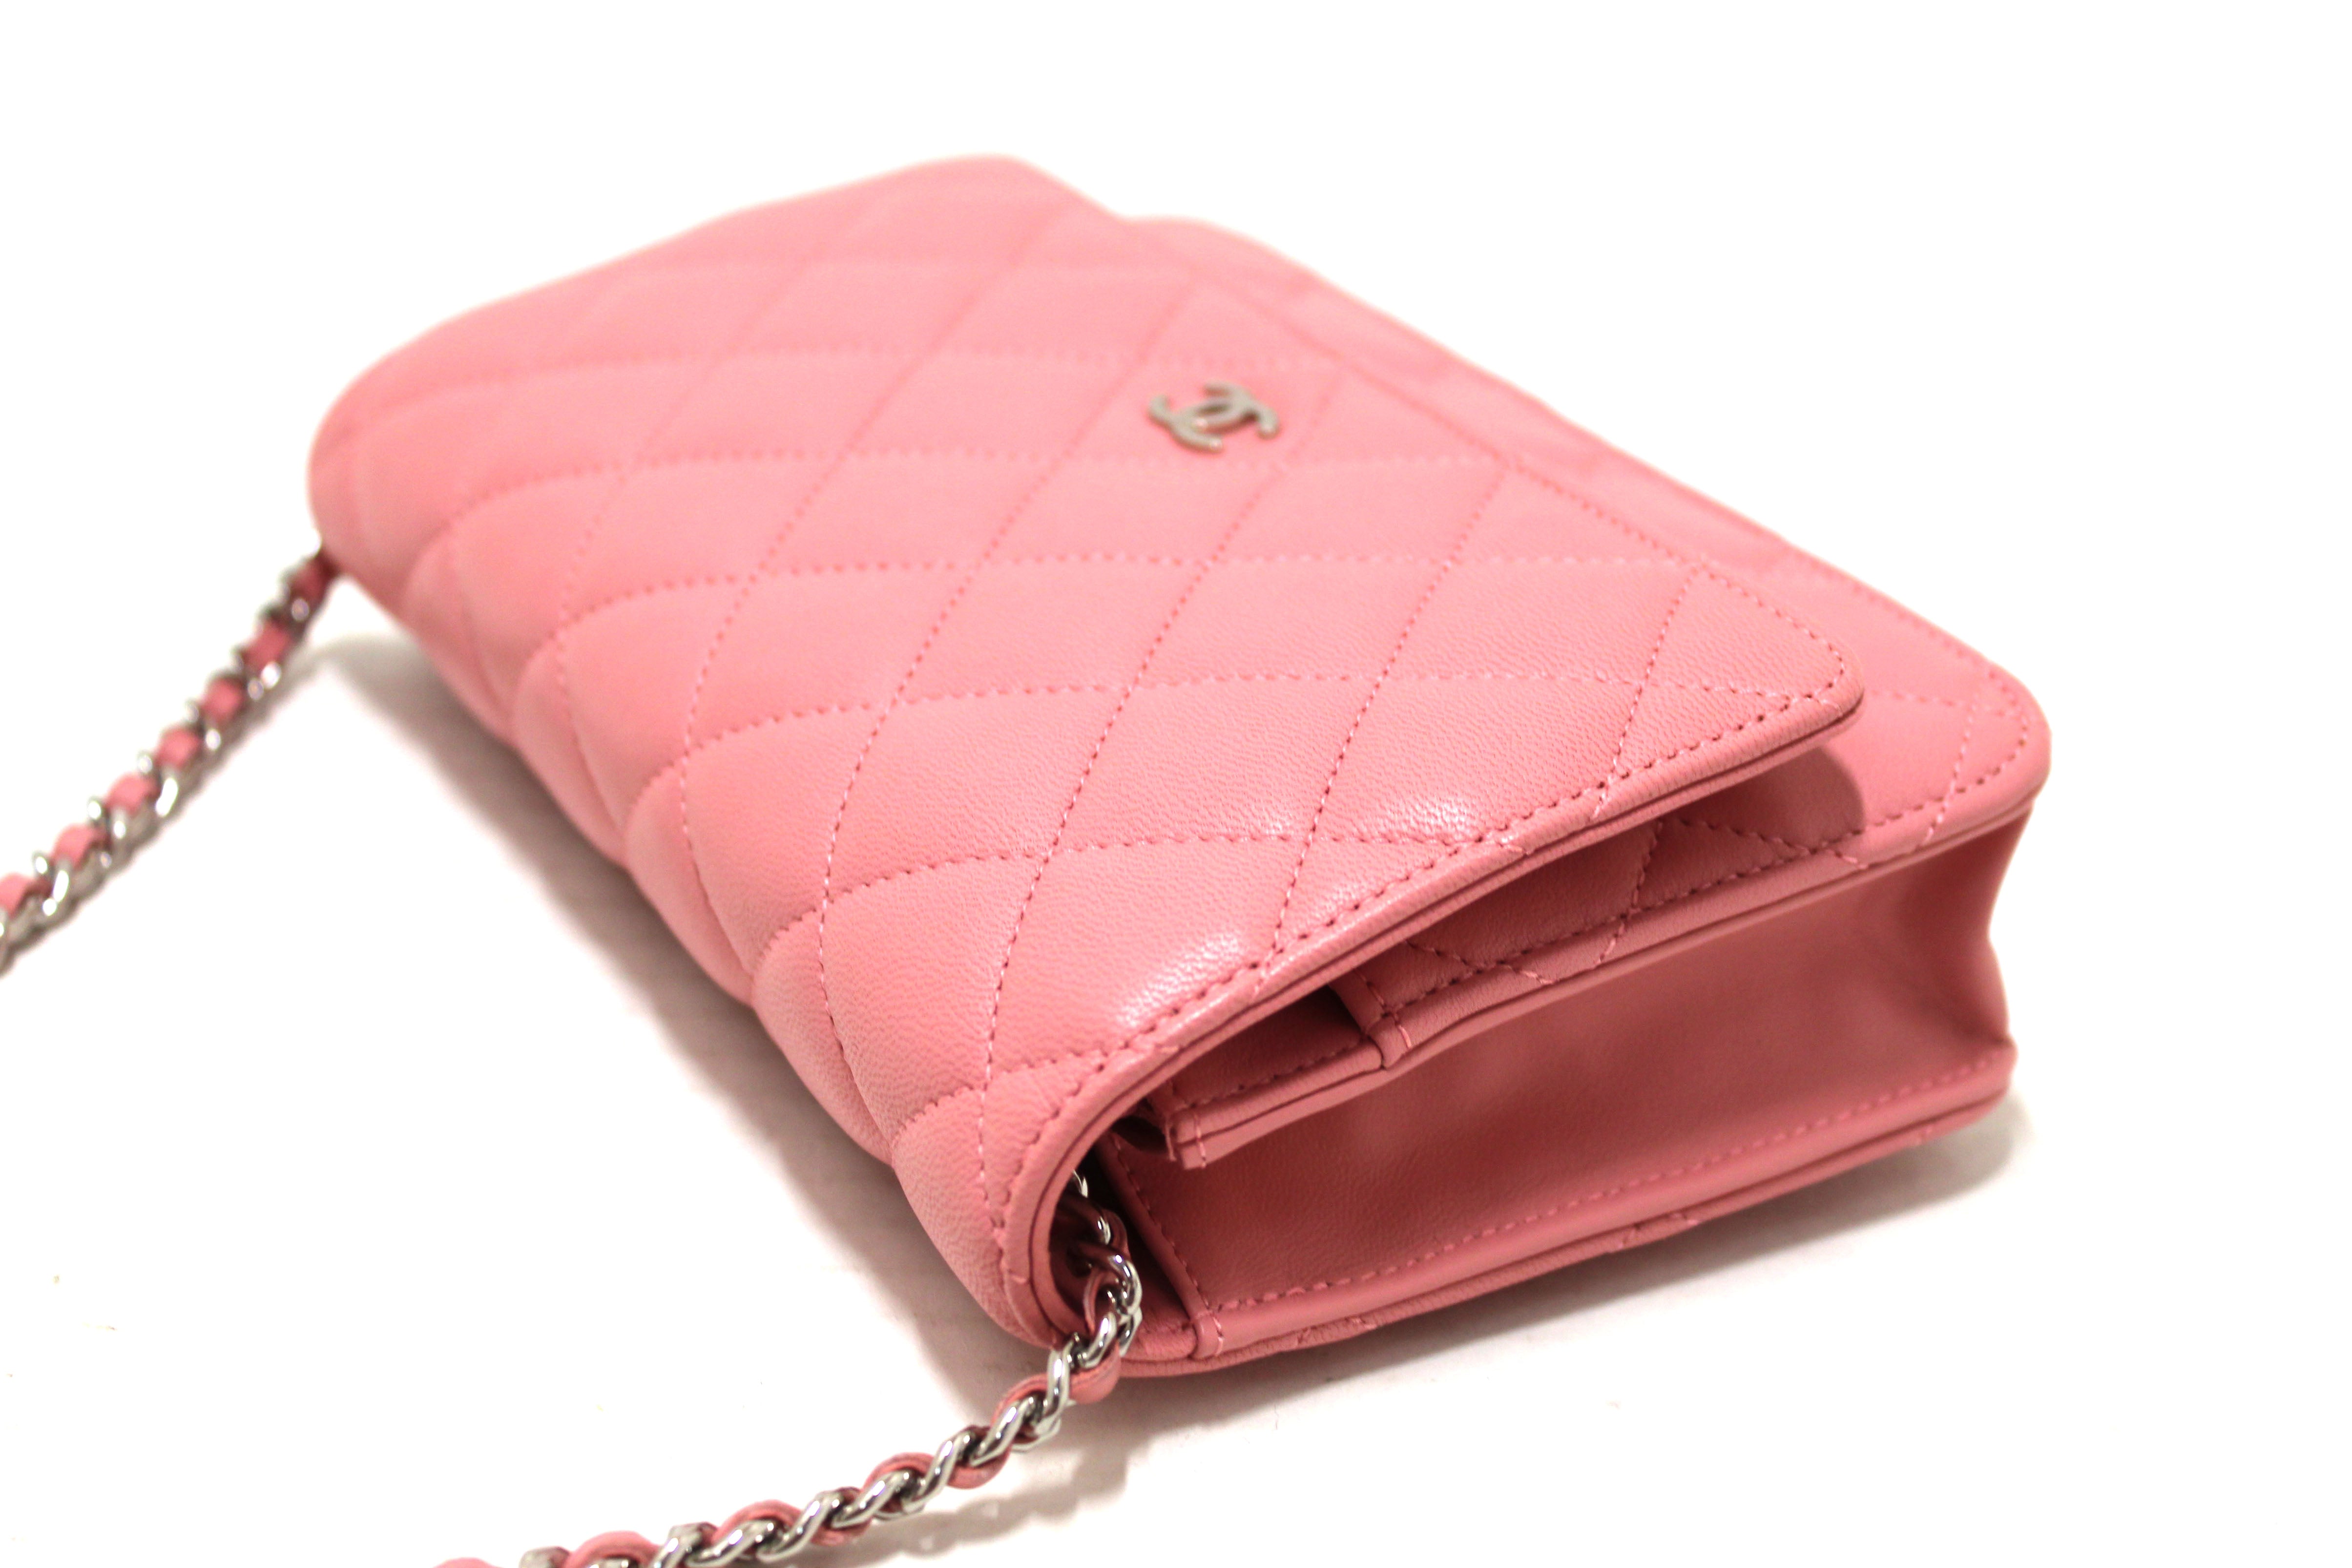 Chanel Quilted Lamé Wallet on Chain